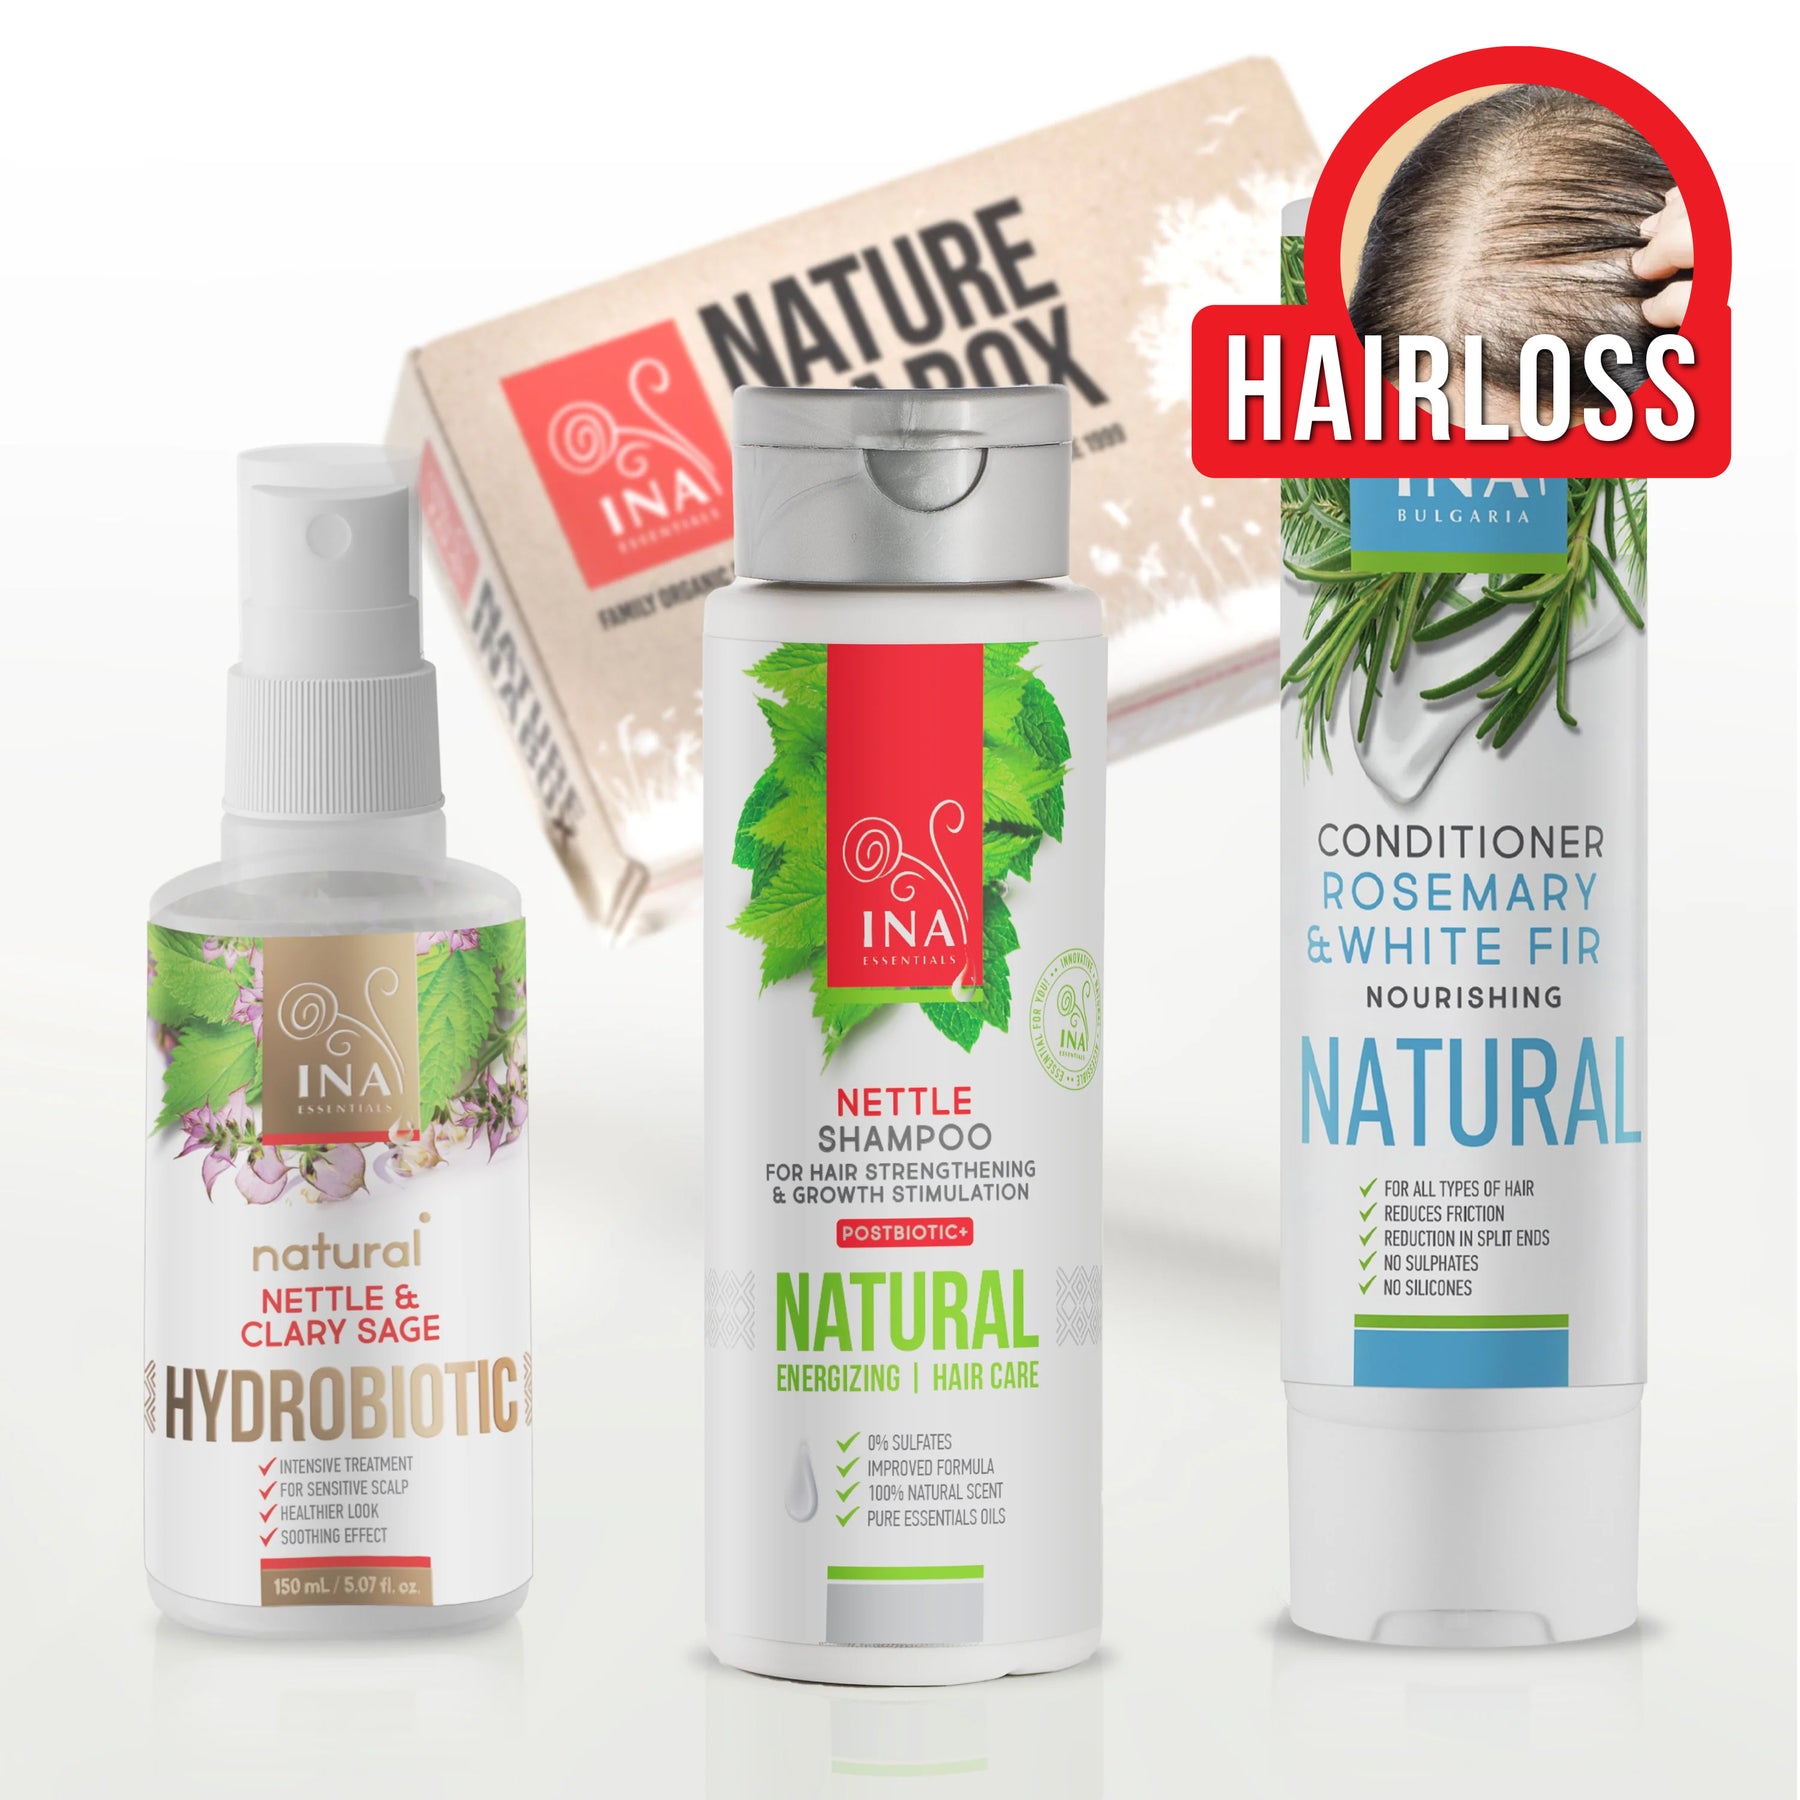 Hair Loss RoutINA™ for Her - lasting solution for Hair Loss